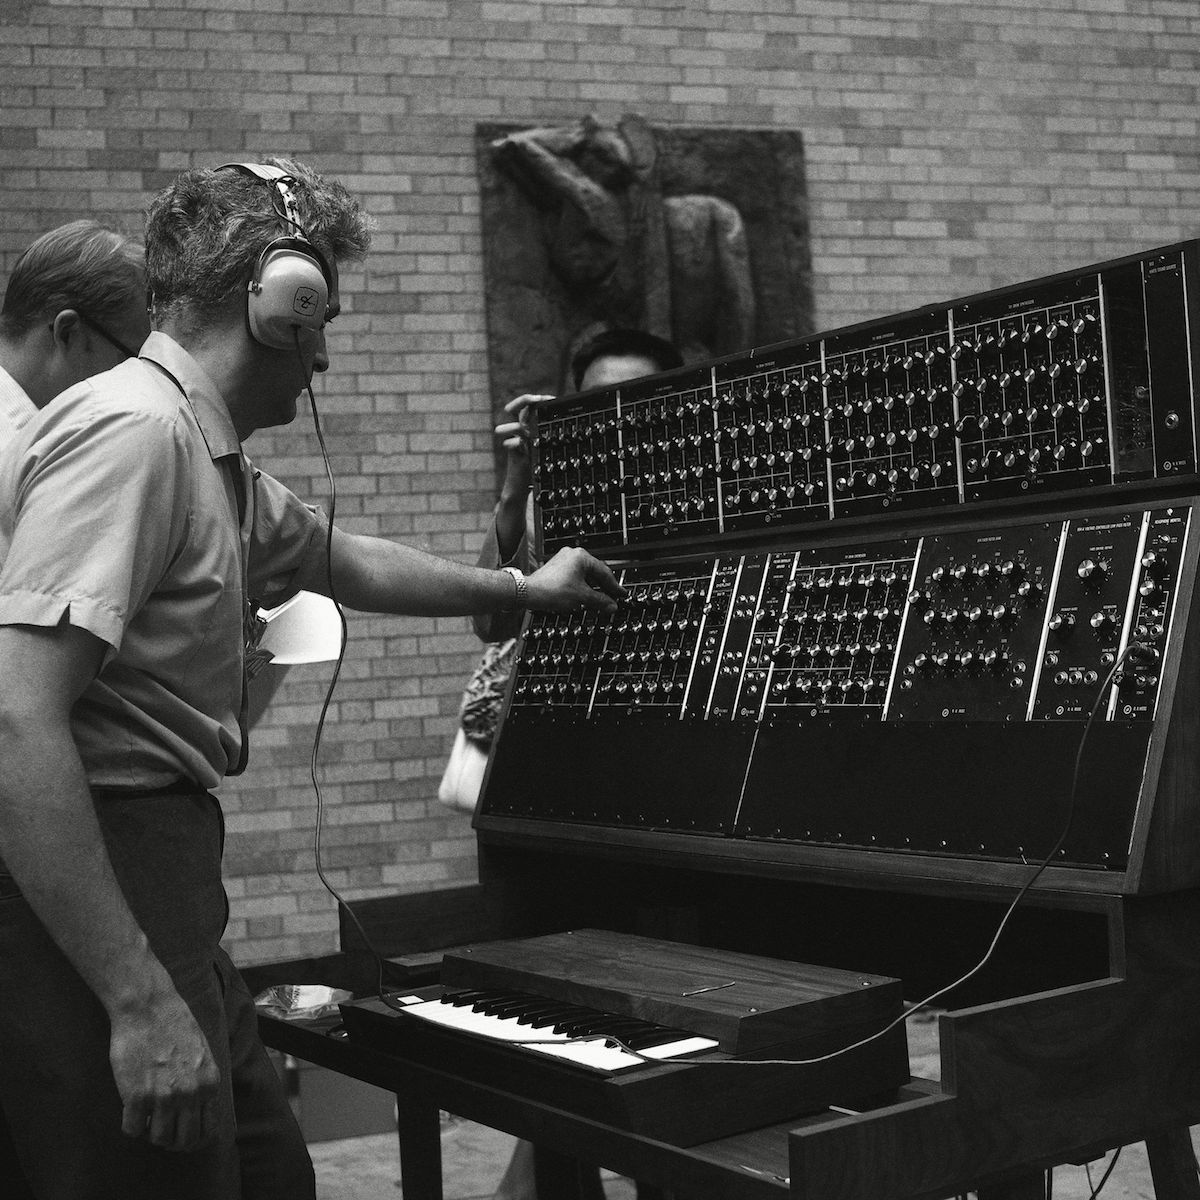 obert Moog, 35, who designed the best known of the electronic musical synthesizers, makes final adjustment on the Moog Synthesizer prior to a jazz concert at Museum of Modern Art, New York. Two quartets played four Moogs during the hour and a half long concert in the Museums open air sculpture garden. Some 4,000 persons attended the concert Robert Moog 1969, New York, USA